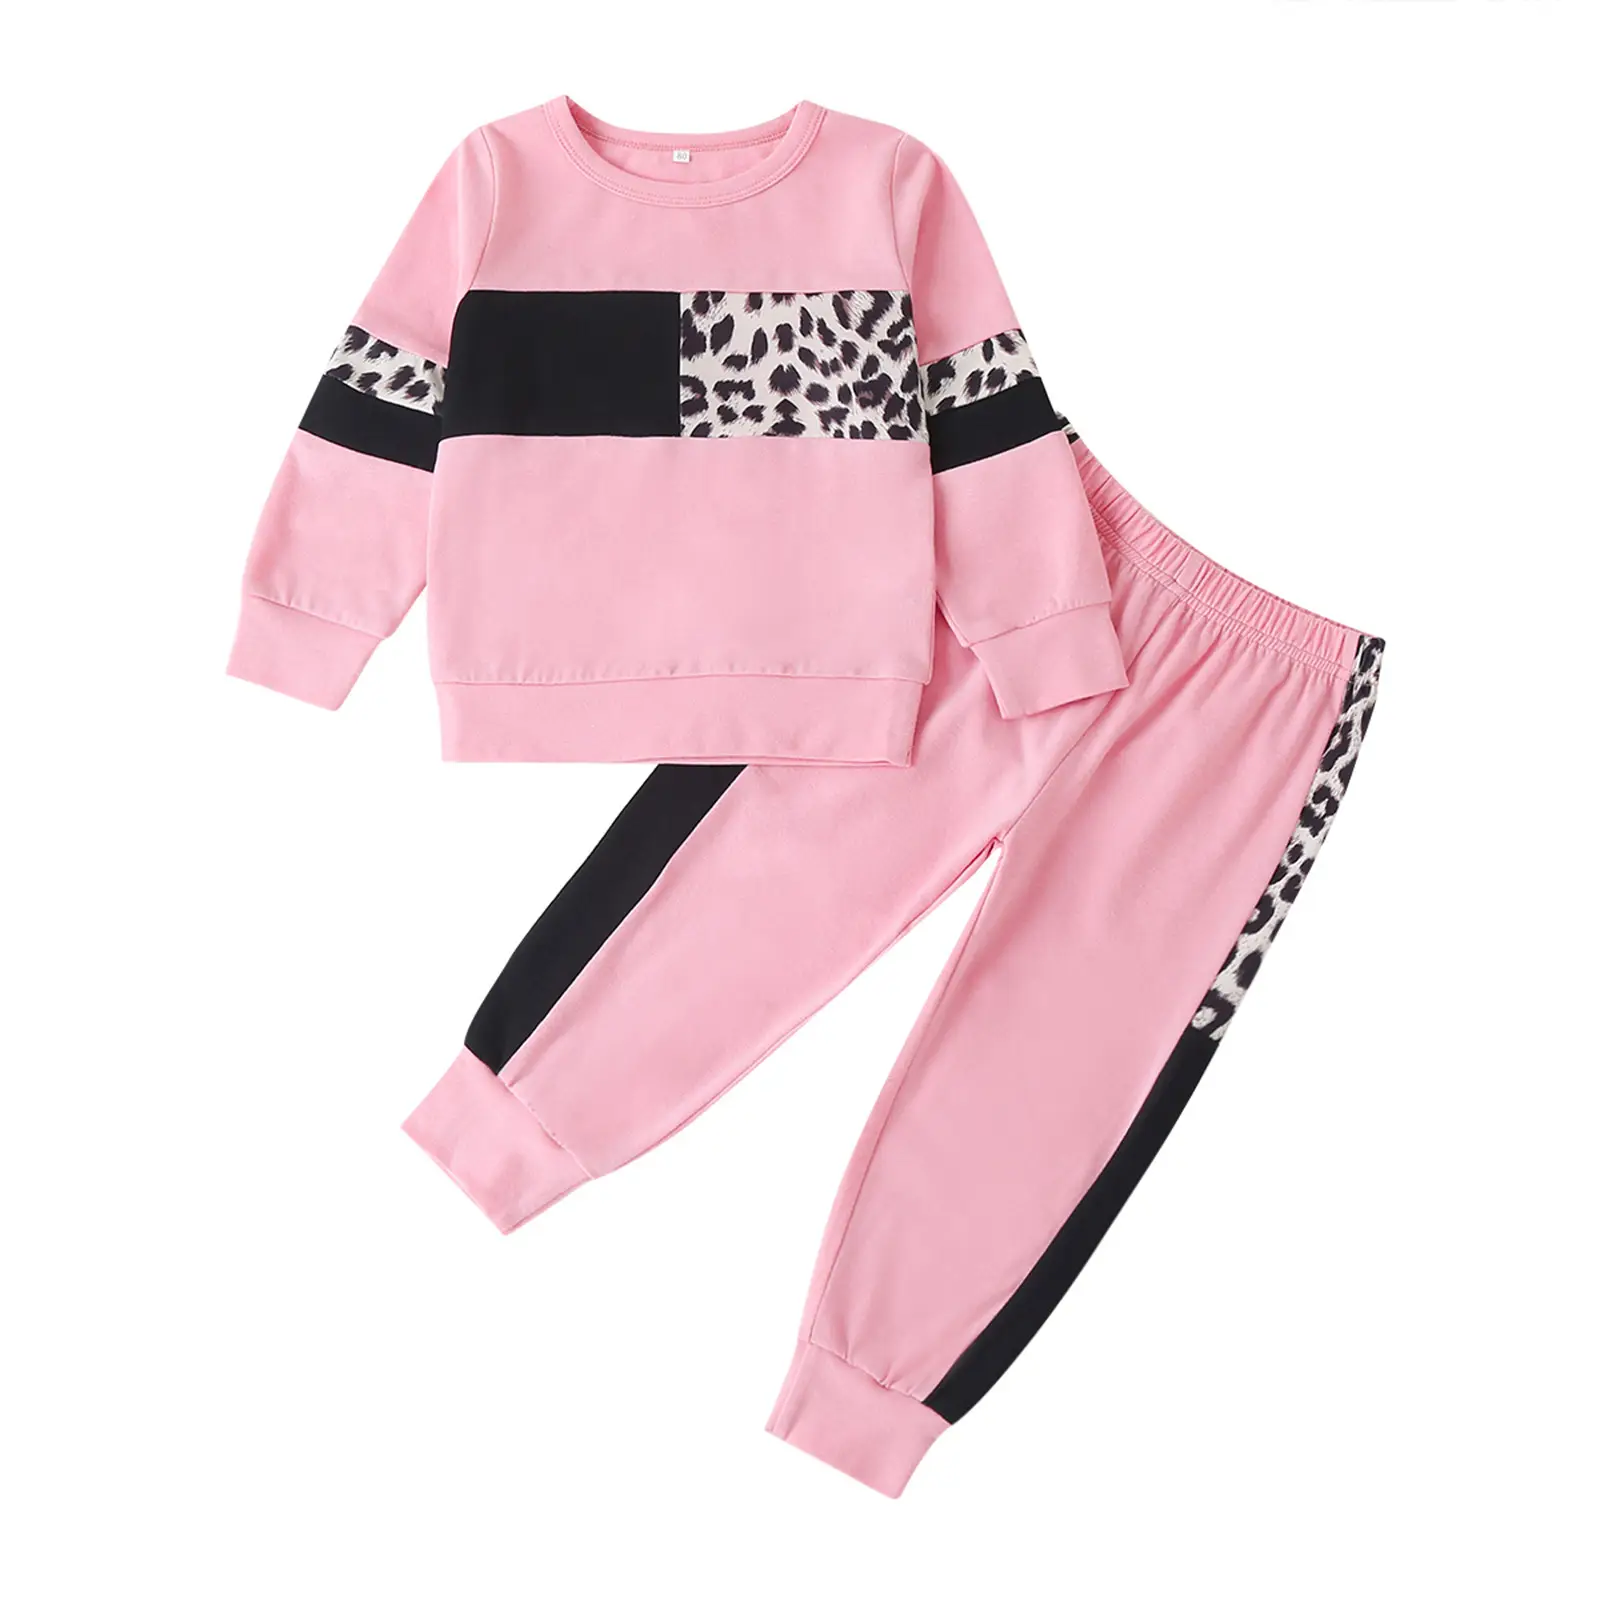 High quality children fall winter clothes private label fleece baby hoodie jogger 2pcs kids girl clothing set